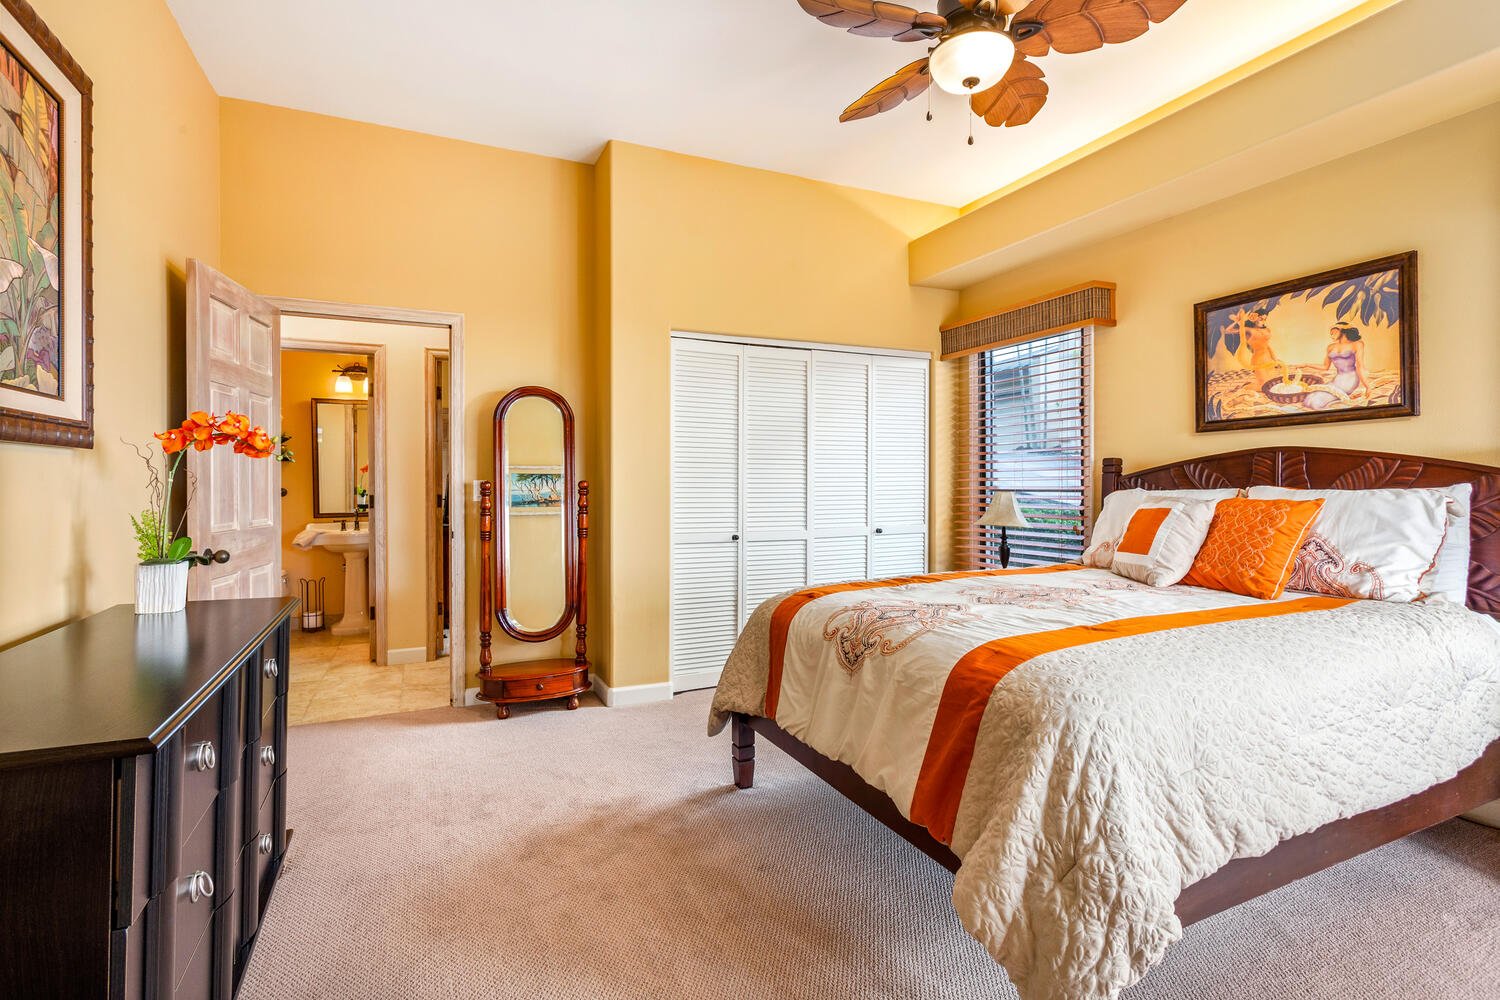 Warm colors and a comfortable queen size bed to welcome you.